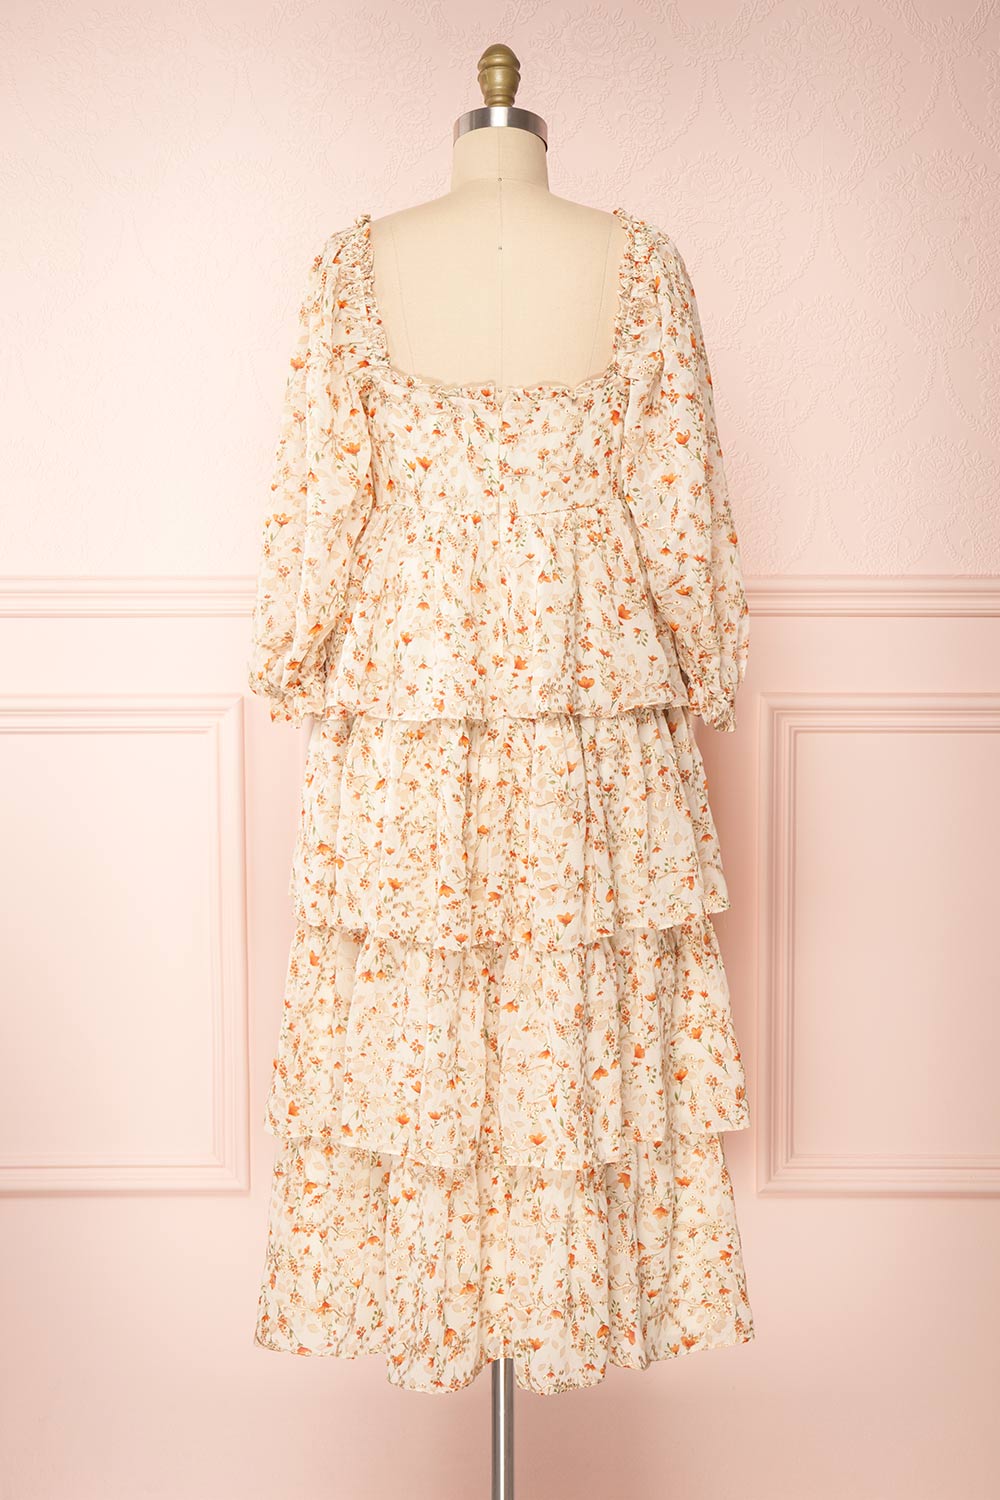 Sophie-Anne Beige Floral Layered Midi Dress | Boutique 1861 back view 